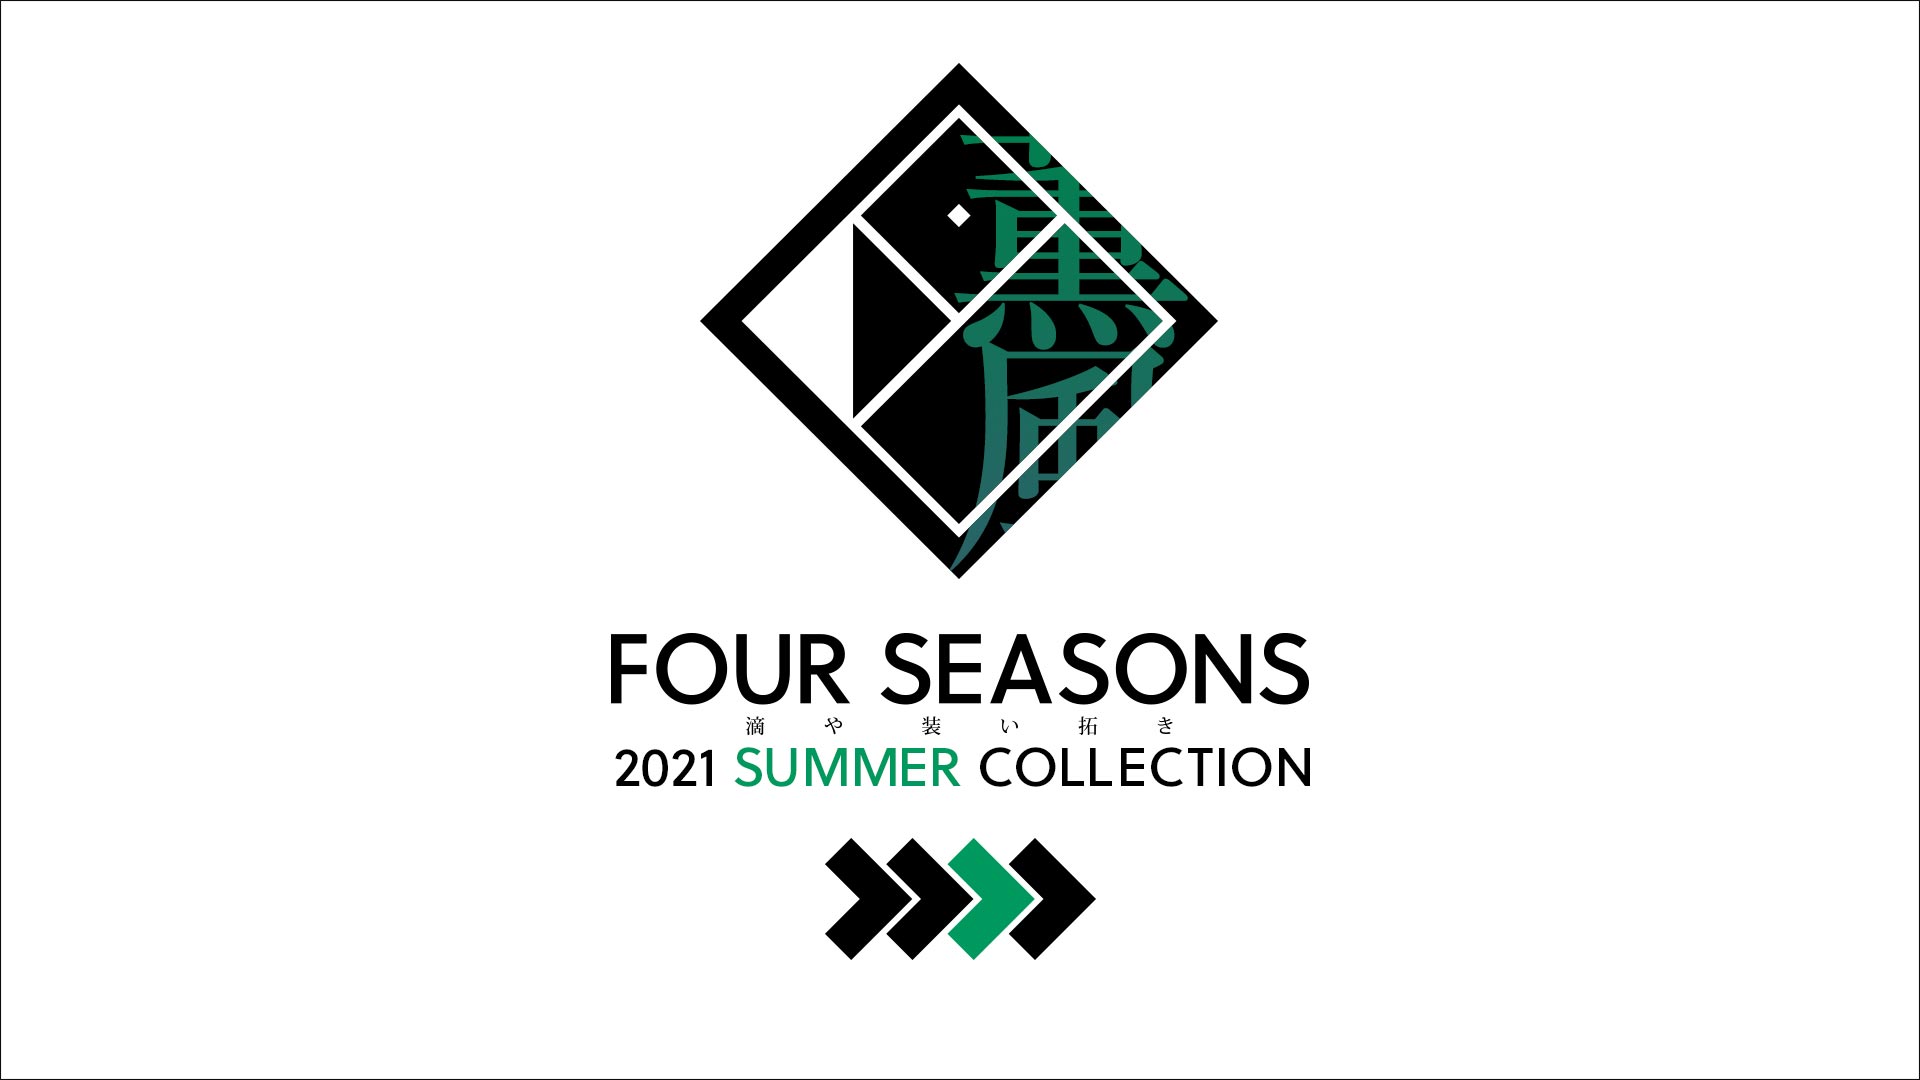 [PHOTO:FOUR SEASONS 2021 SUMMER COLLECTION]